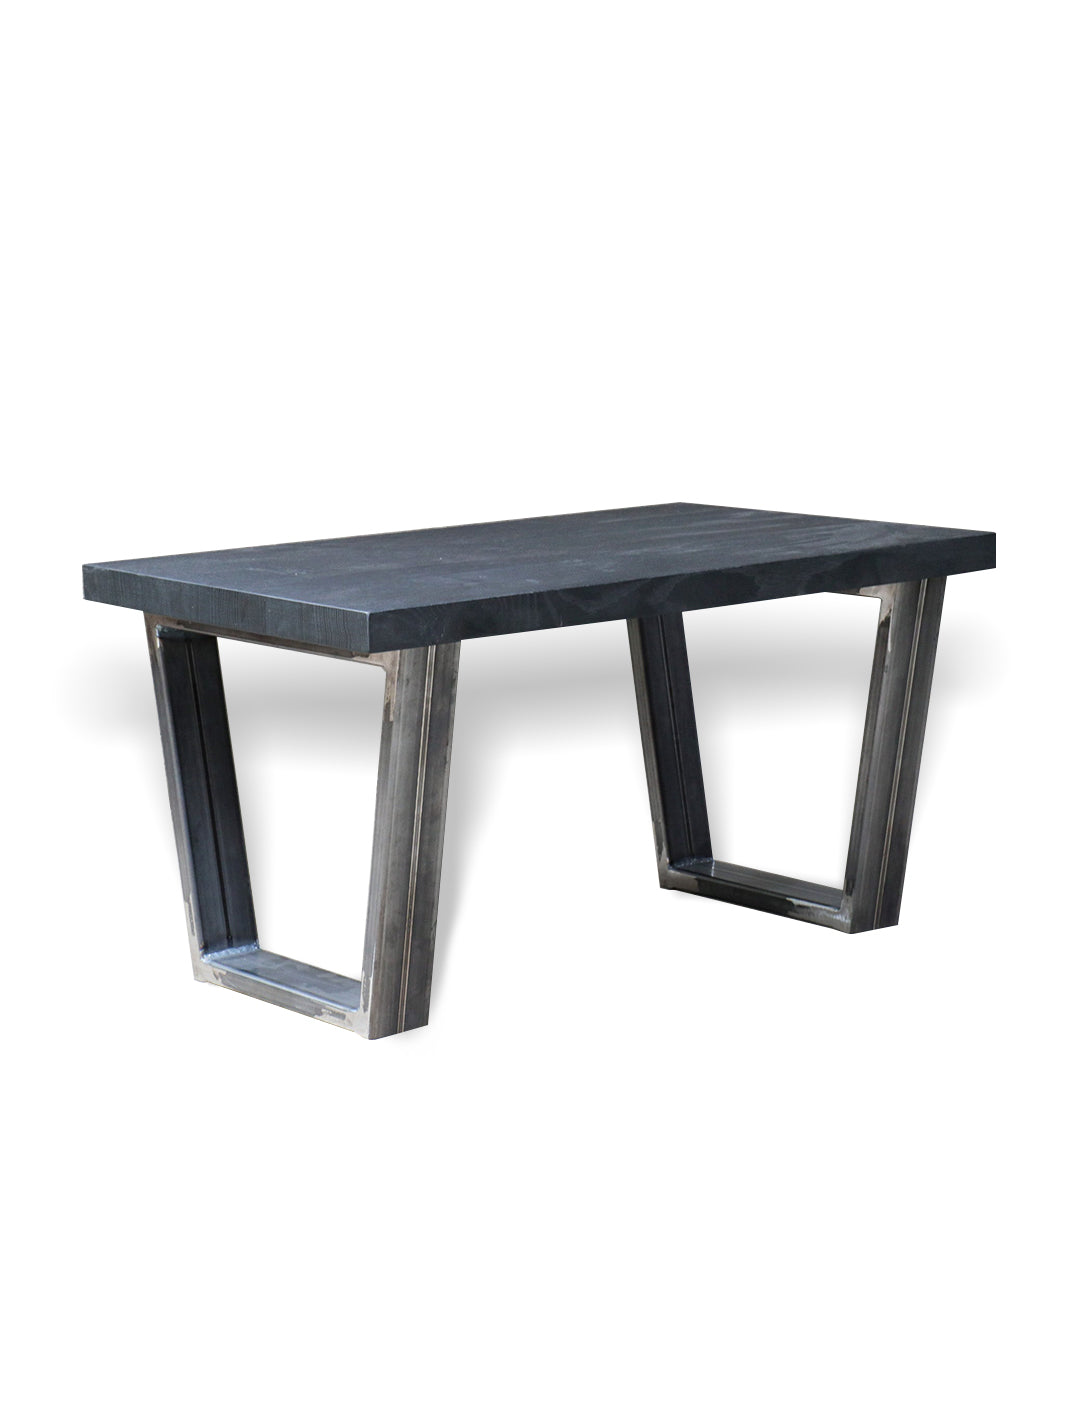 Modern Black Quartersawn White Oak and Steel Coffee Table Earthly Comfort Coffee Tables 961